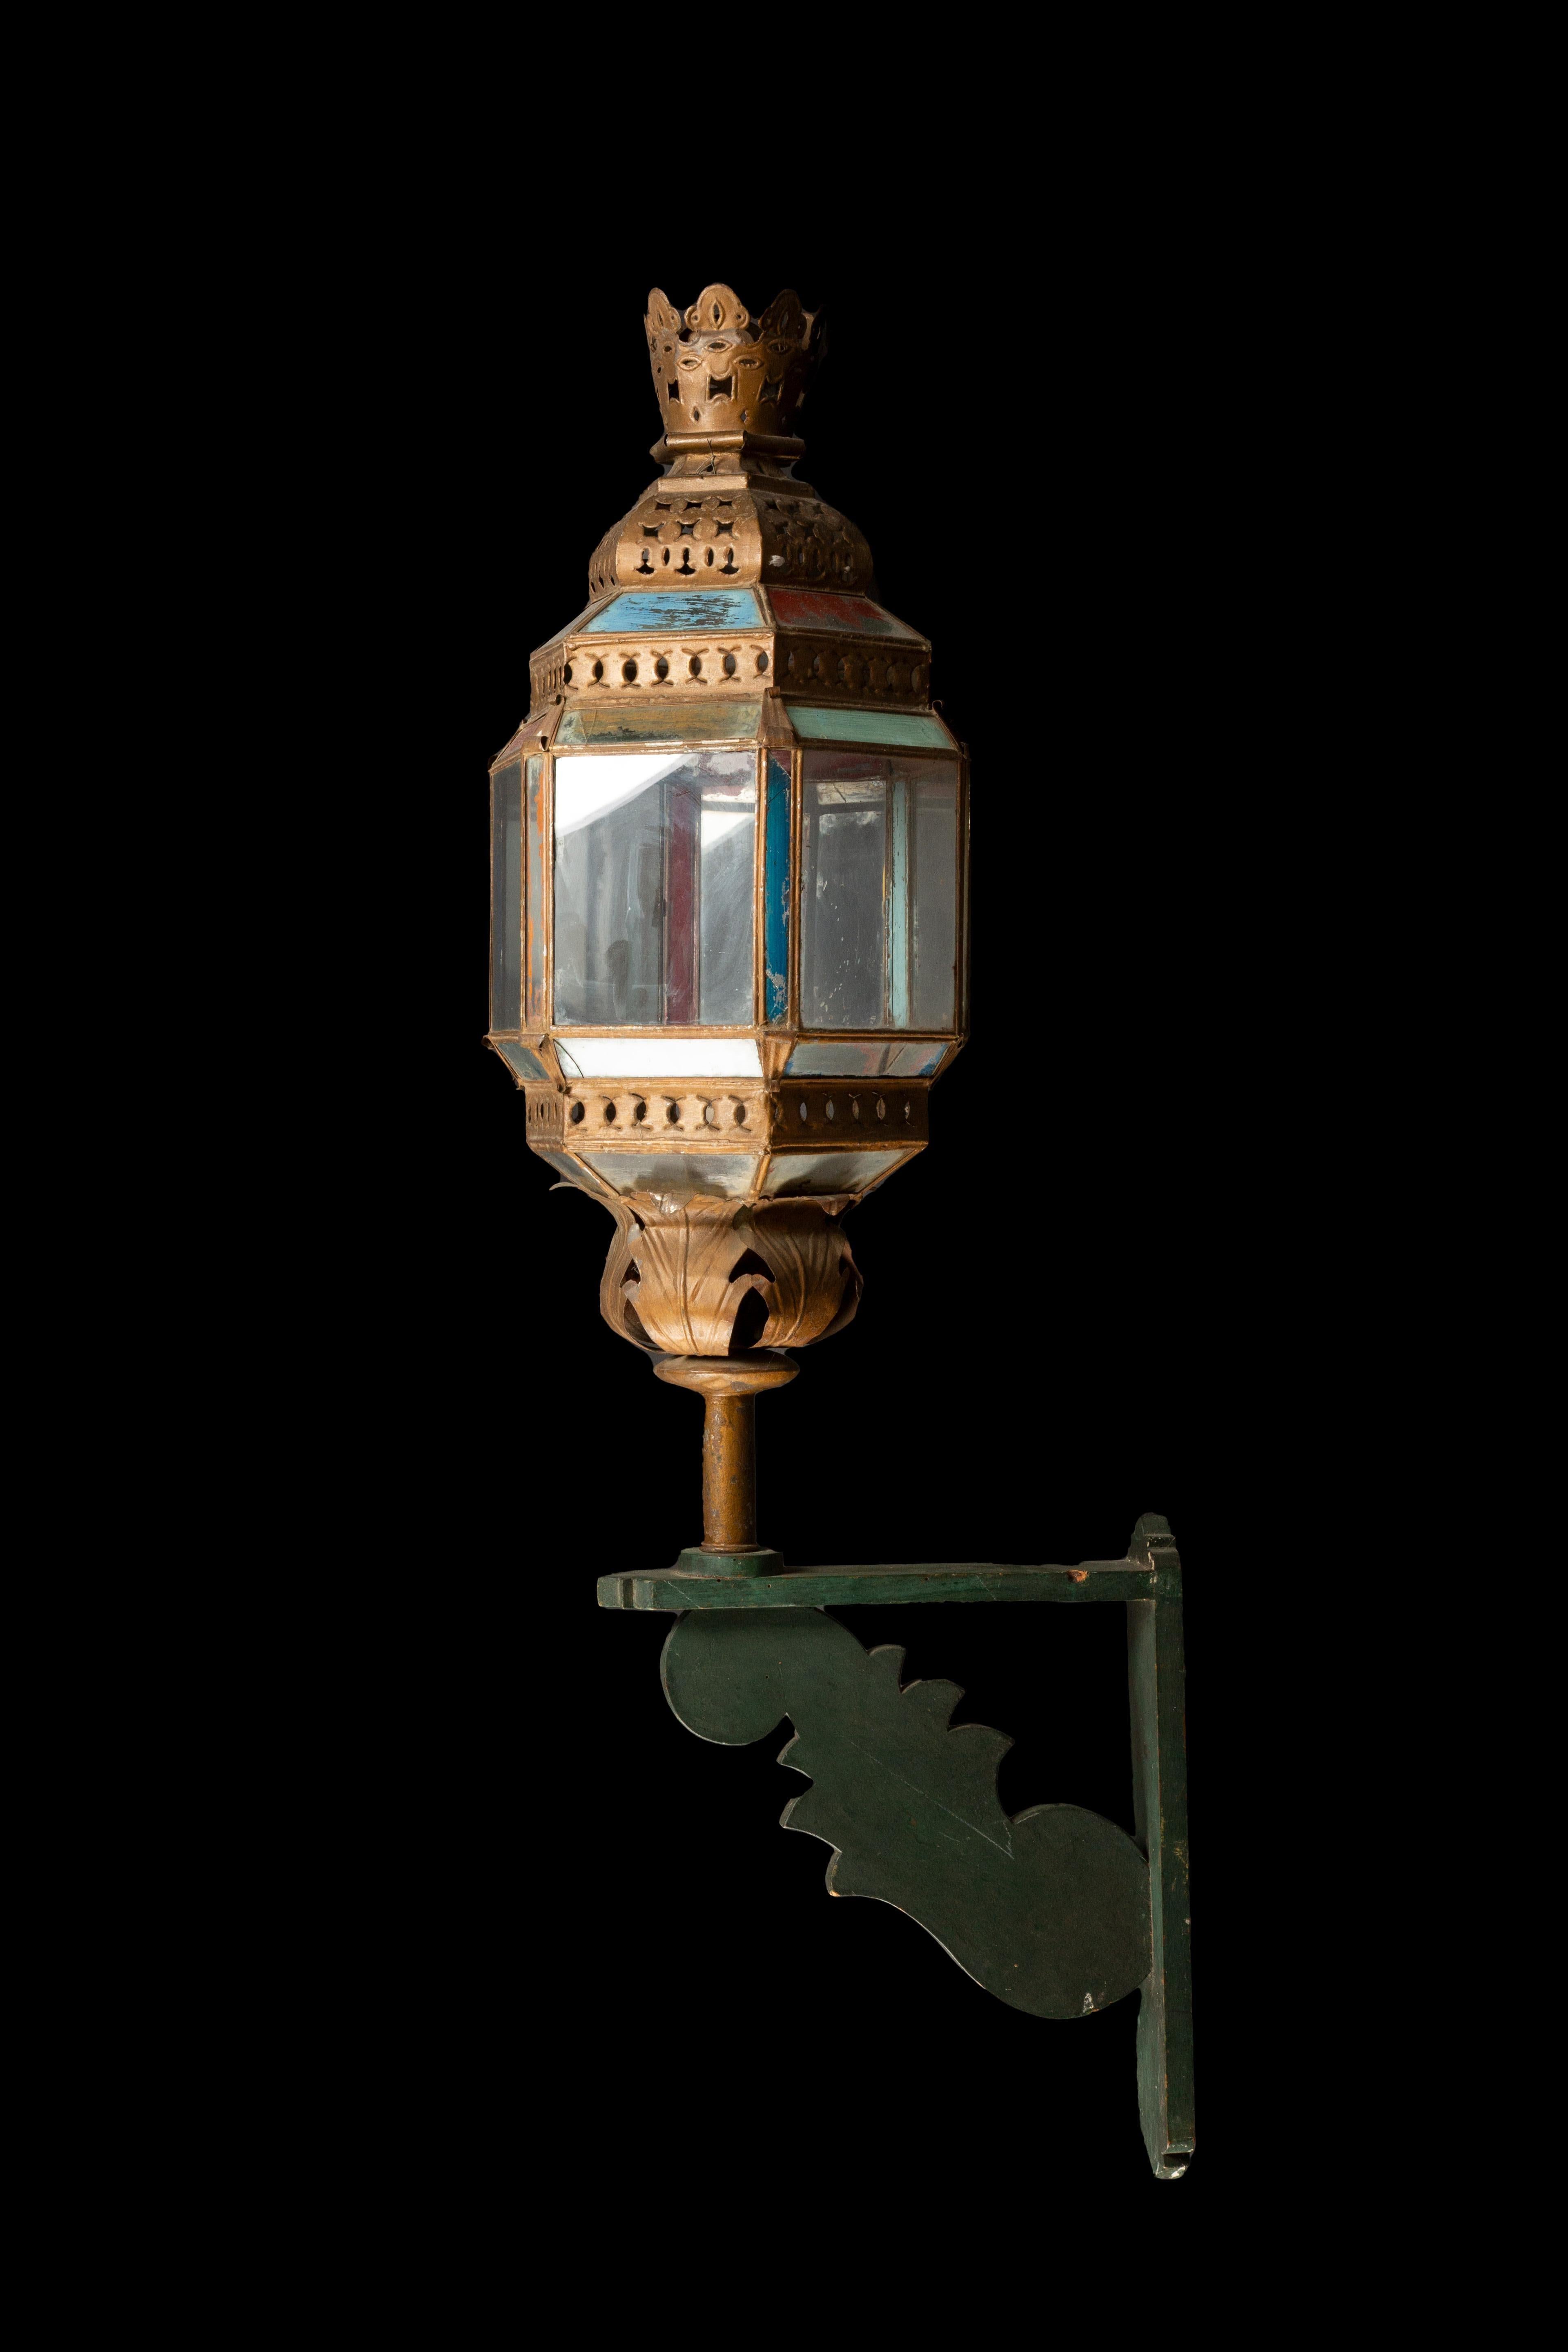 Exquisite pair of grand 19th-century Venetian lanterns, gracefully adorned with intricate craftsmanship and suspended upon meticulously crafted custom wood brackets. These magnificent lanterns, steeped in the rich history and artistic tradition of